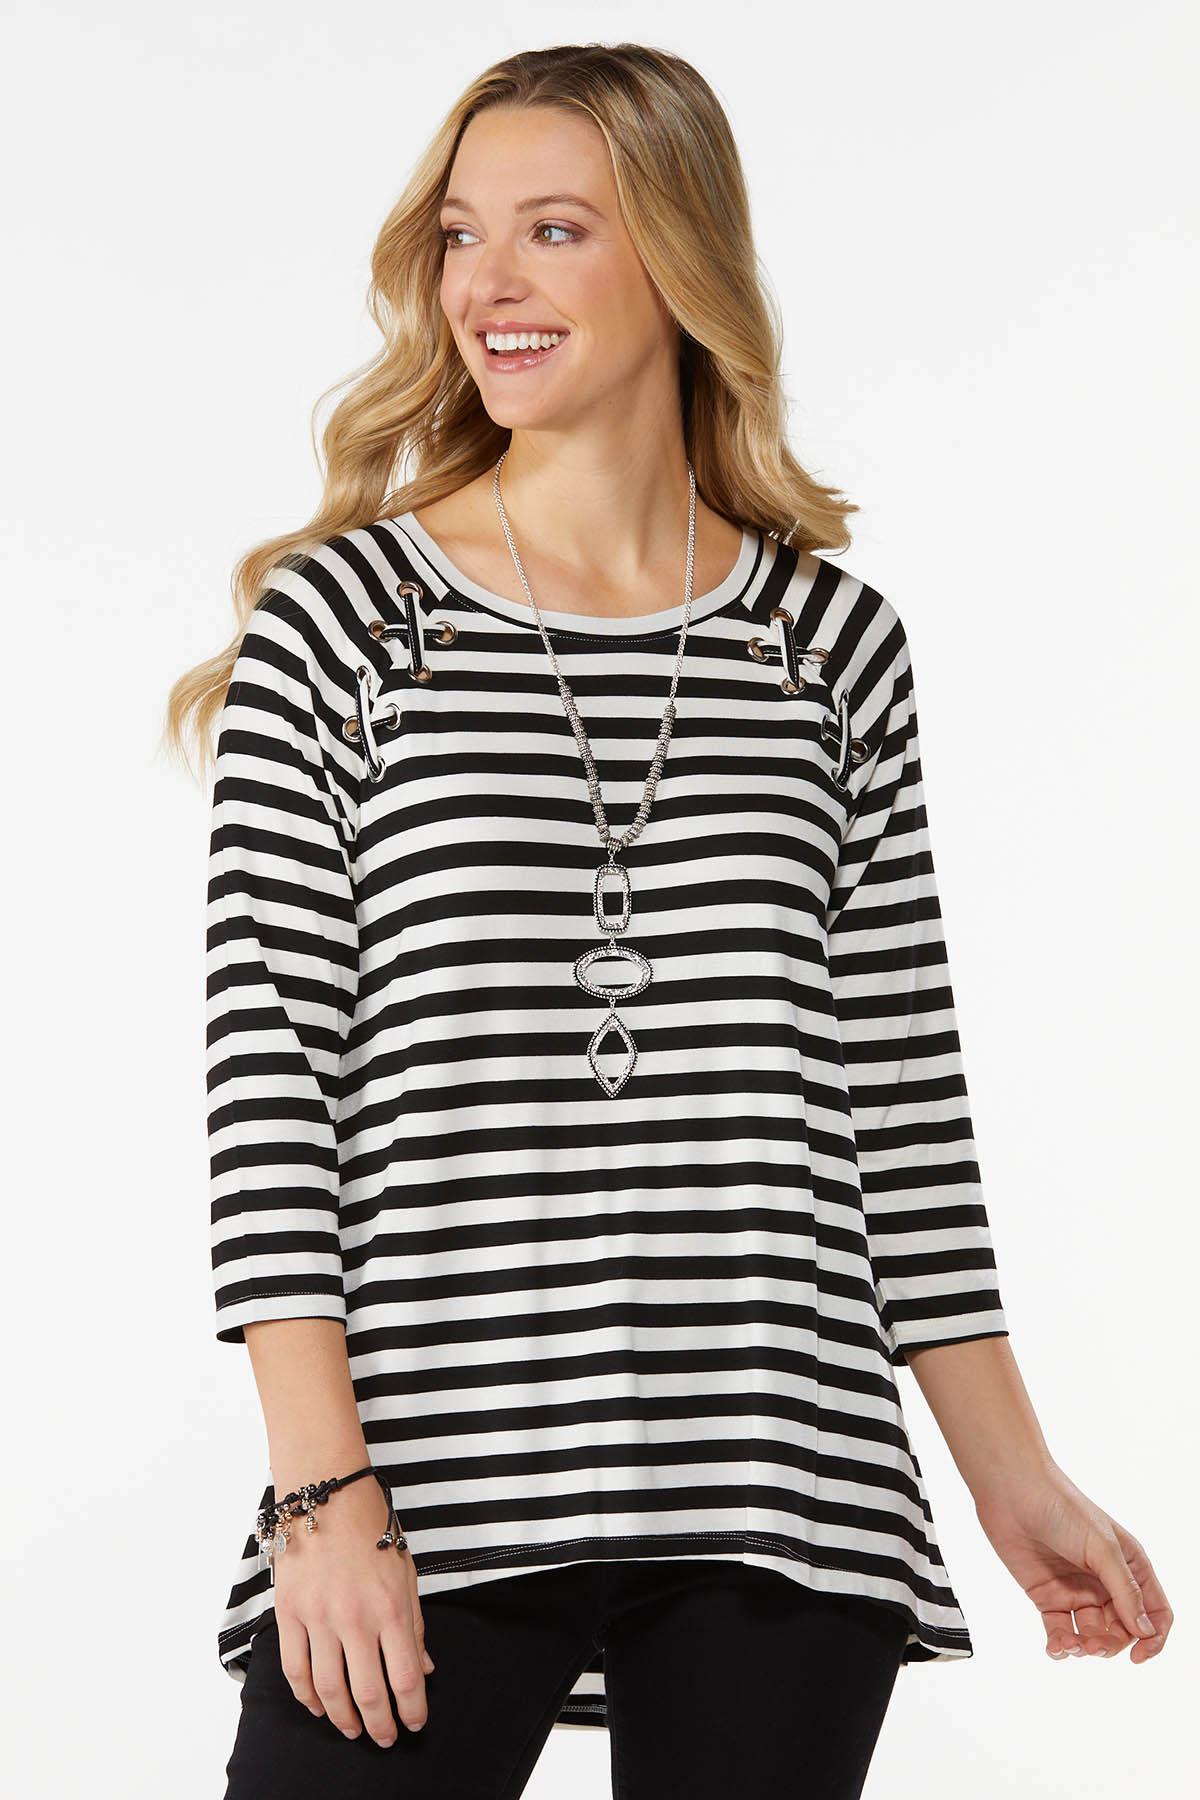 Lace-Up Detail Striped Tunic